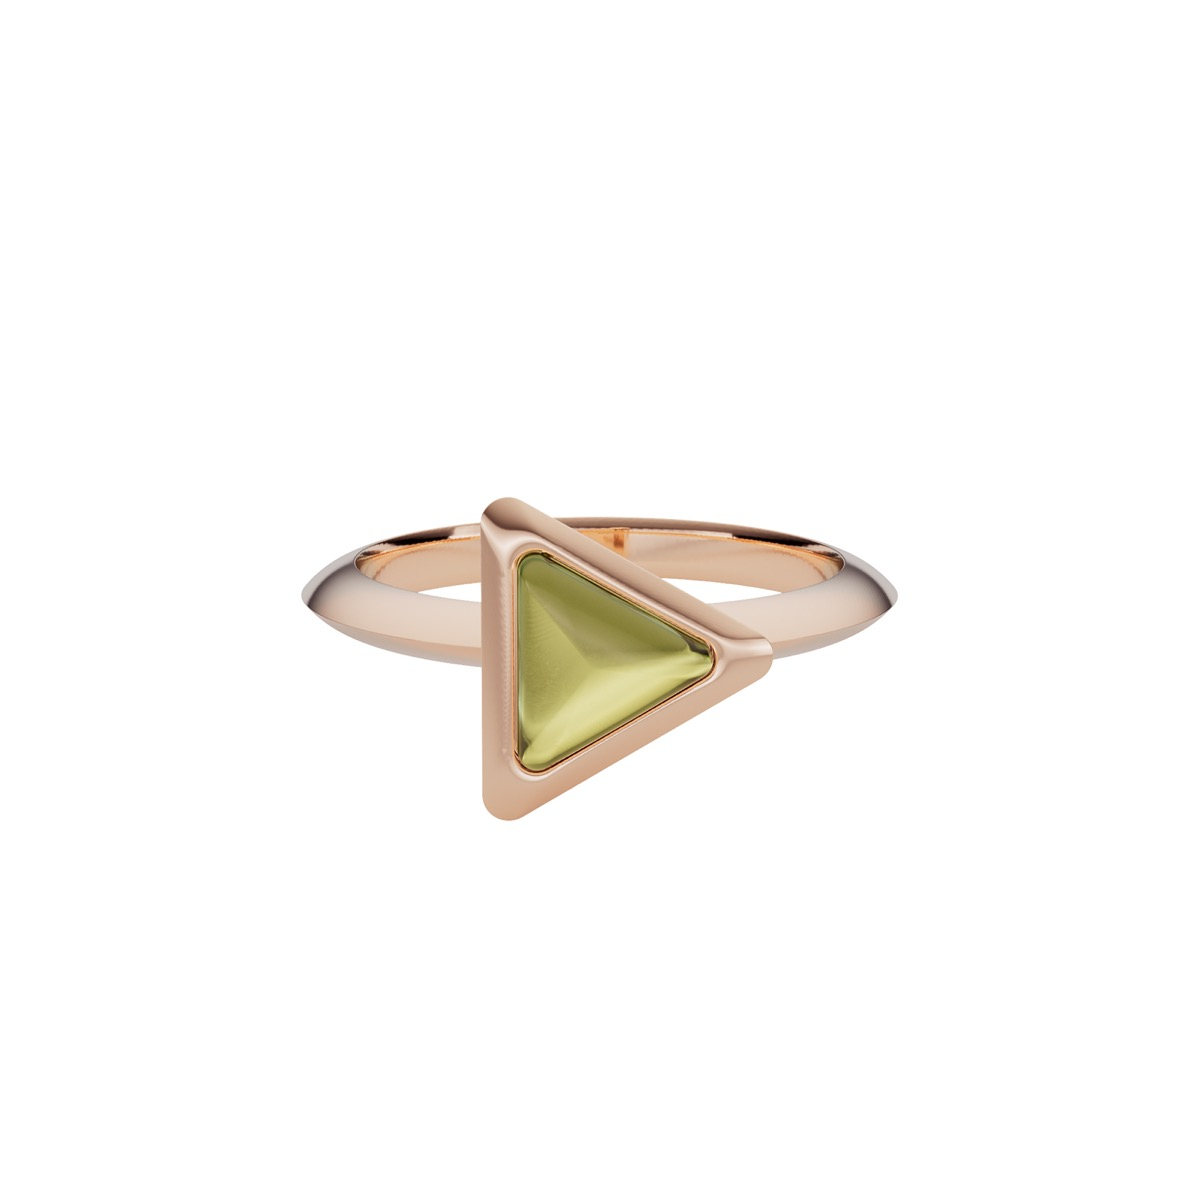  Ring Be The One Gem Rose Gold  Green Tourmaline - 9kt gold